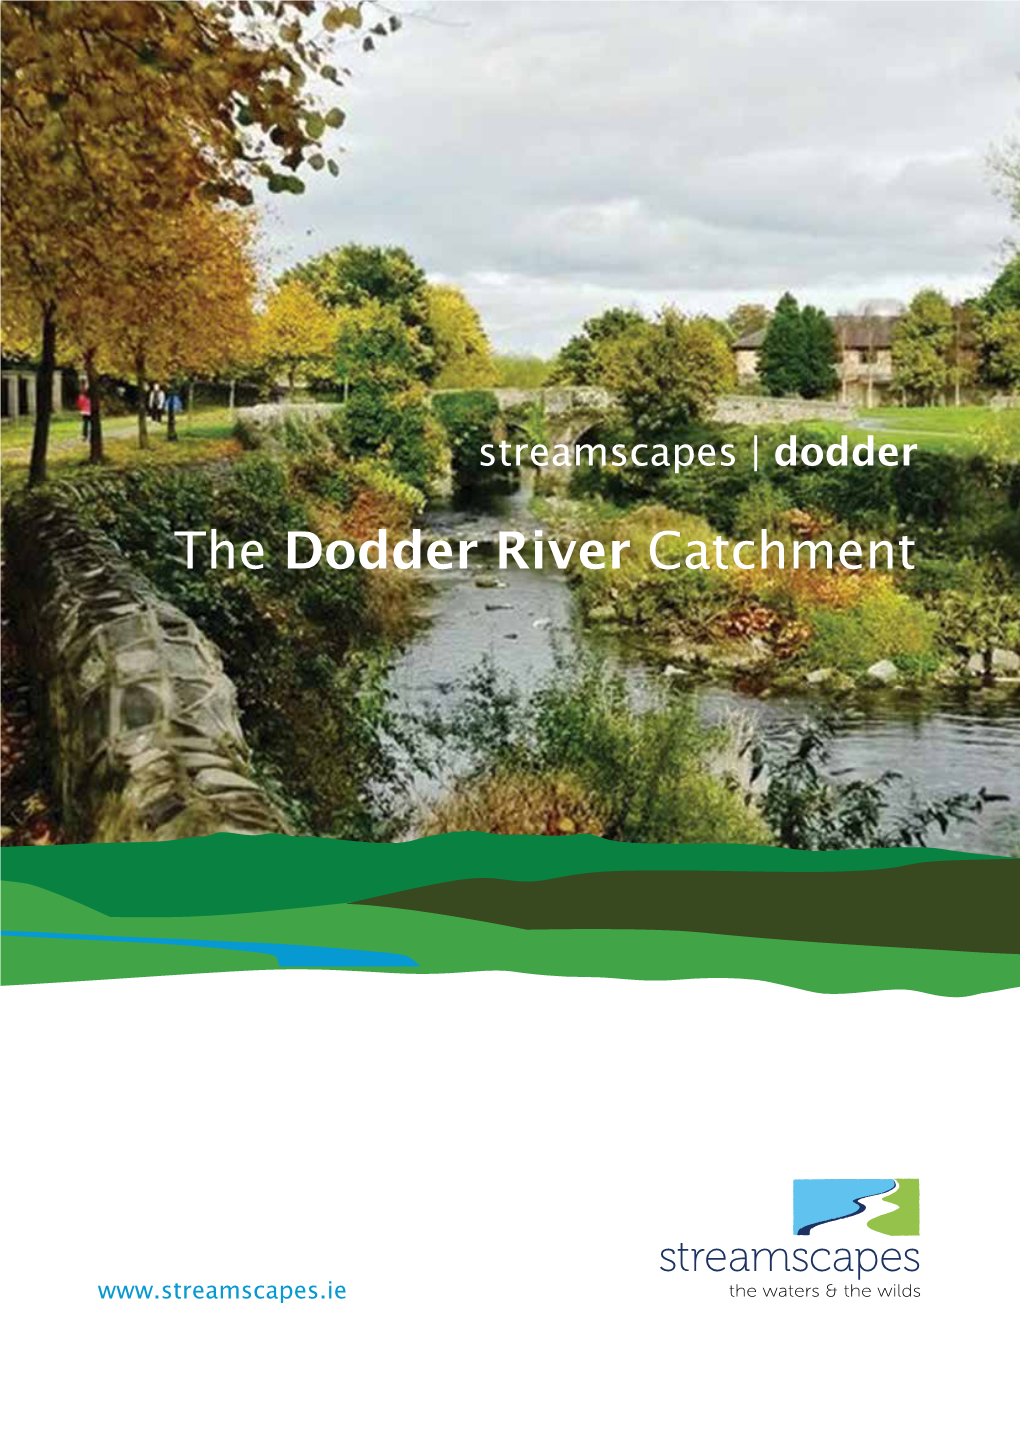 The Dodder River Catchment